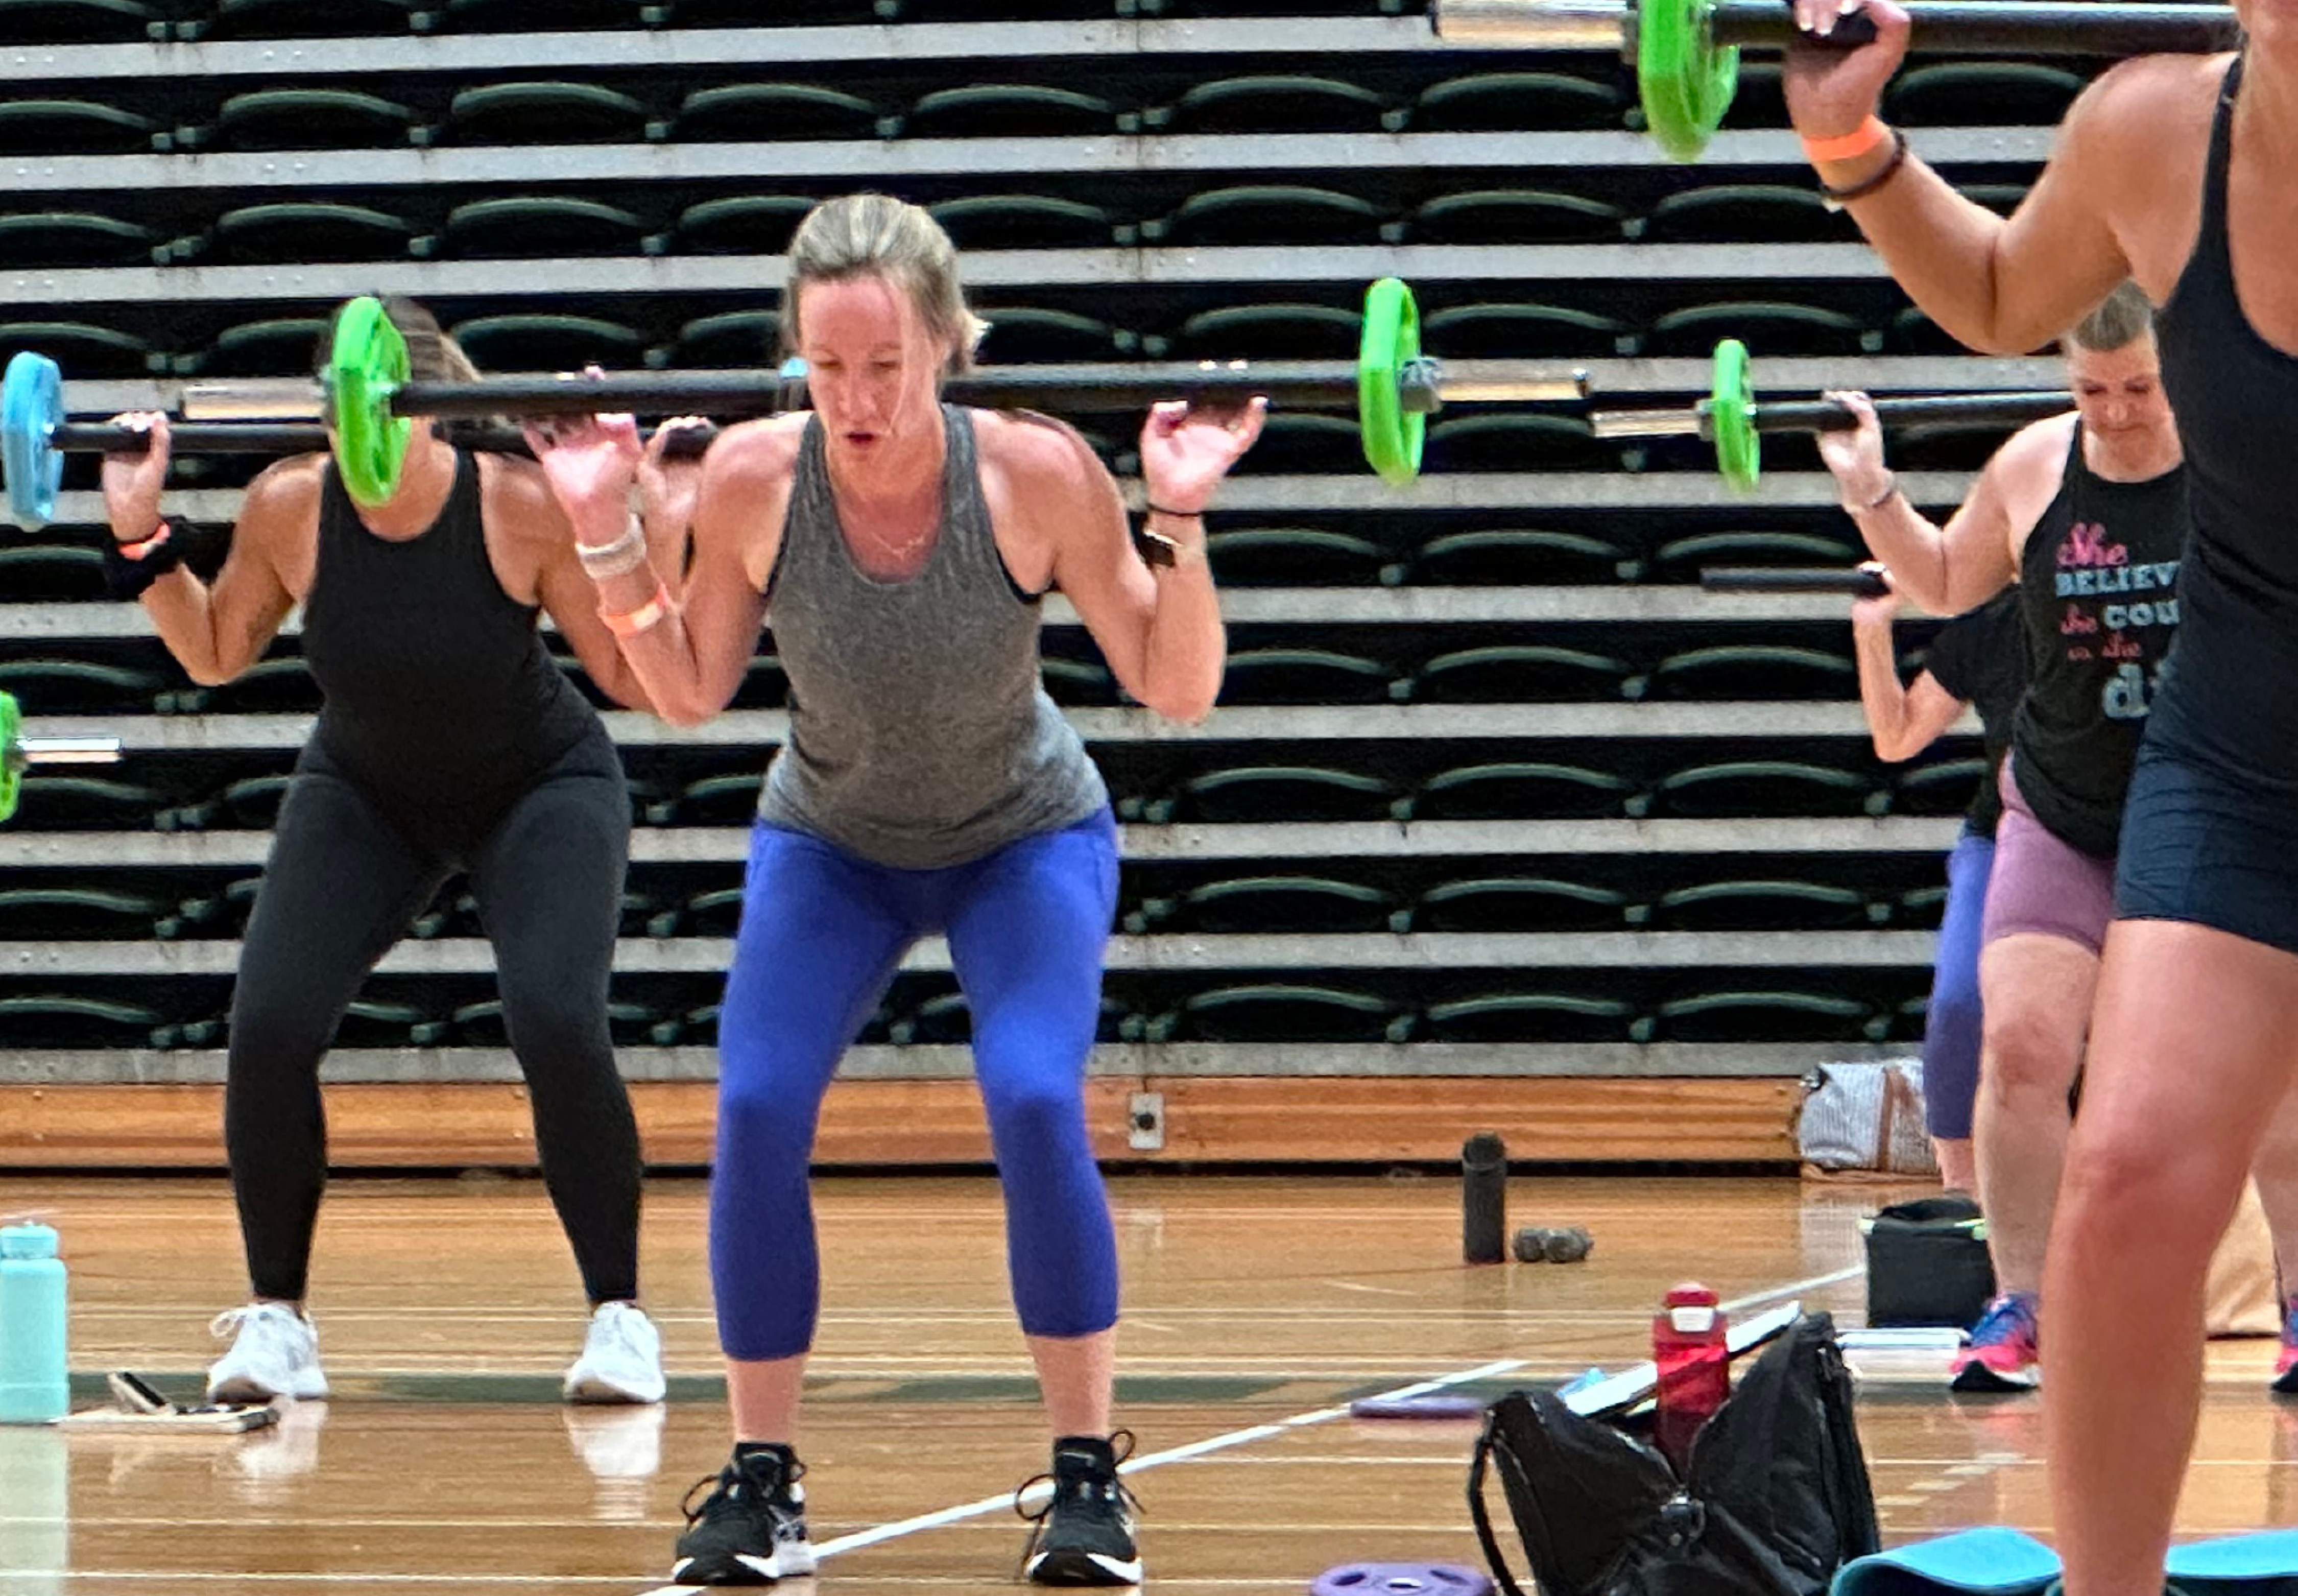 Image of group exercise class using barbells